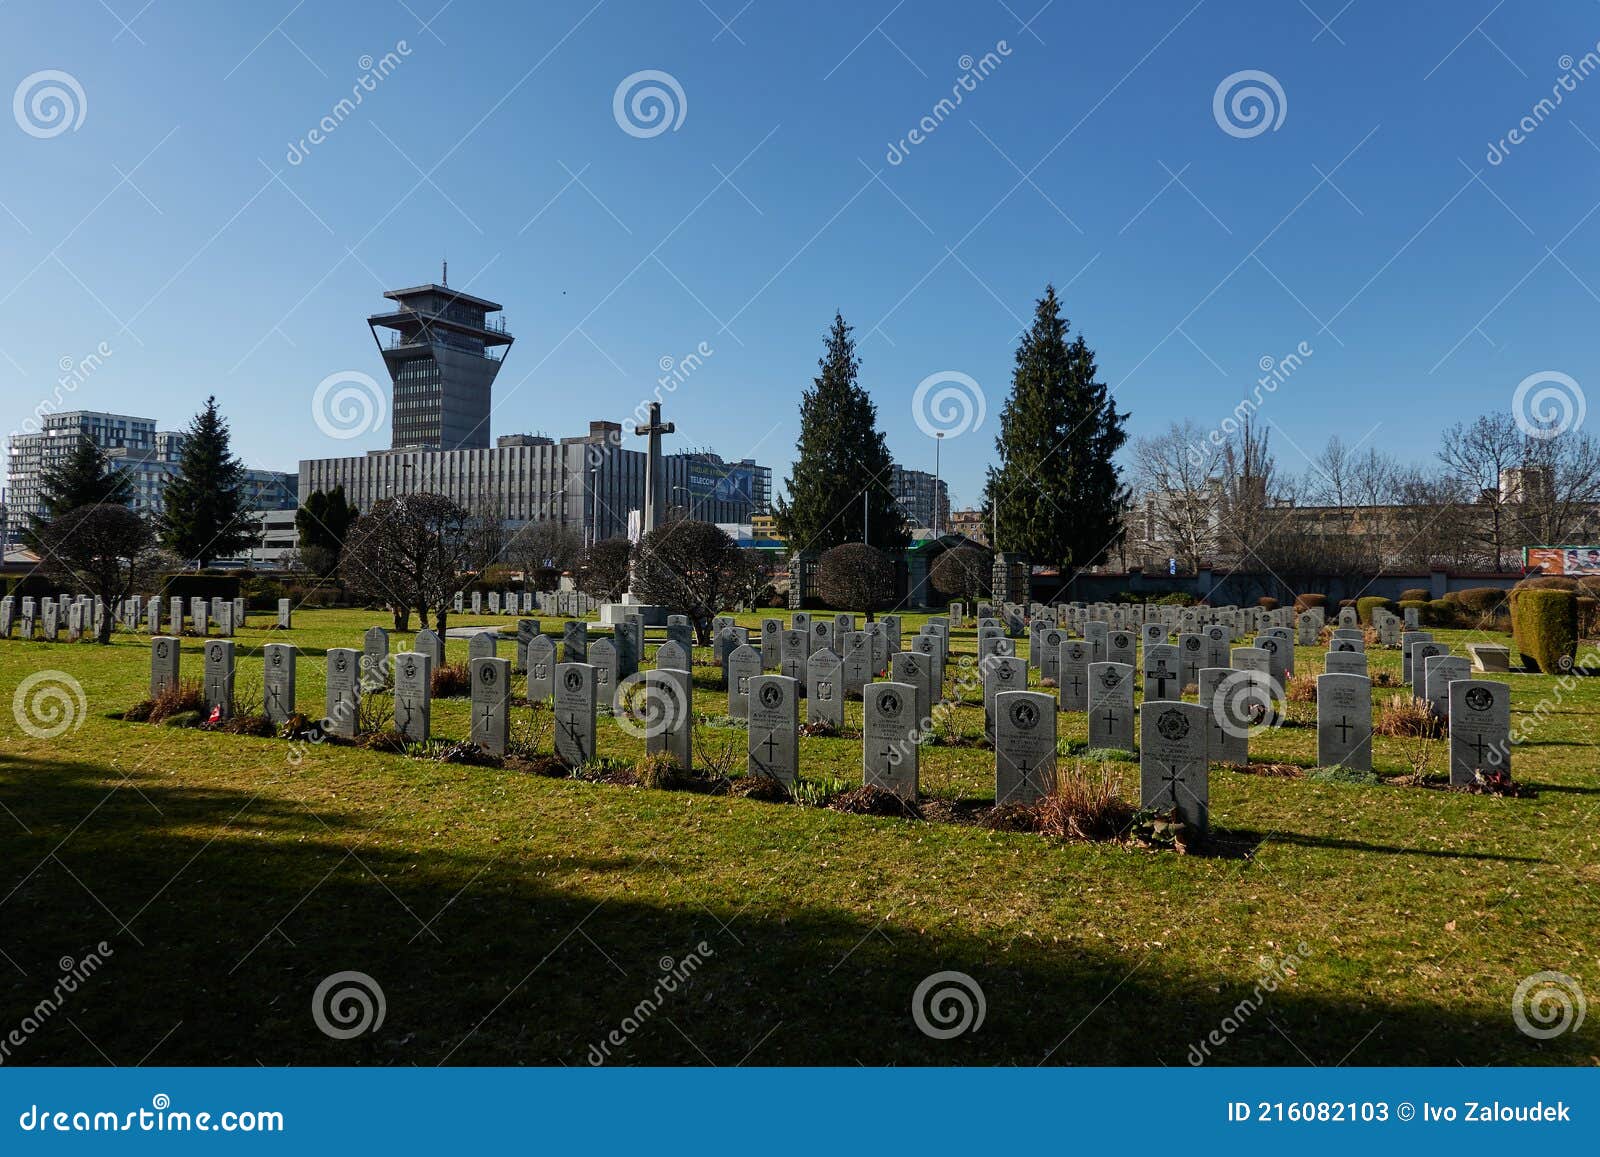 prague, czech republic - march 30, 2021 - prague war cemetery  1939 - 1945. there are even some commonwealth war graves here